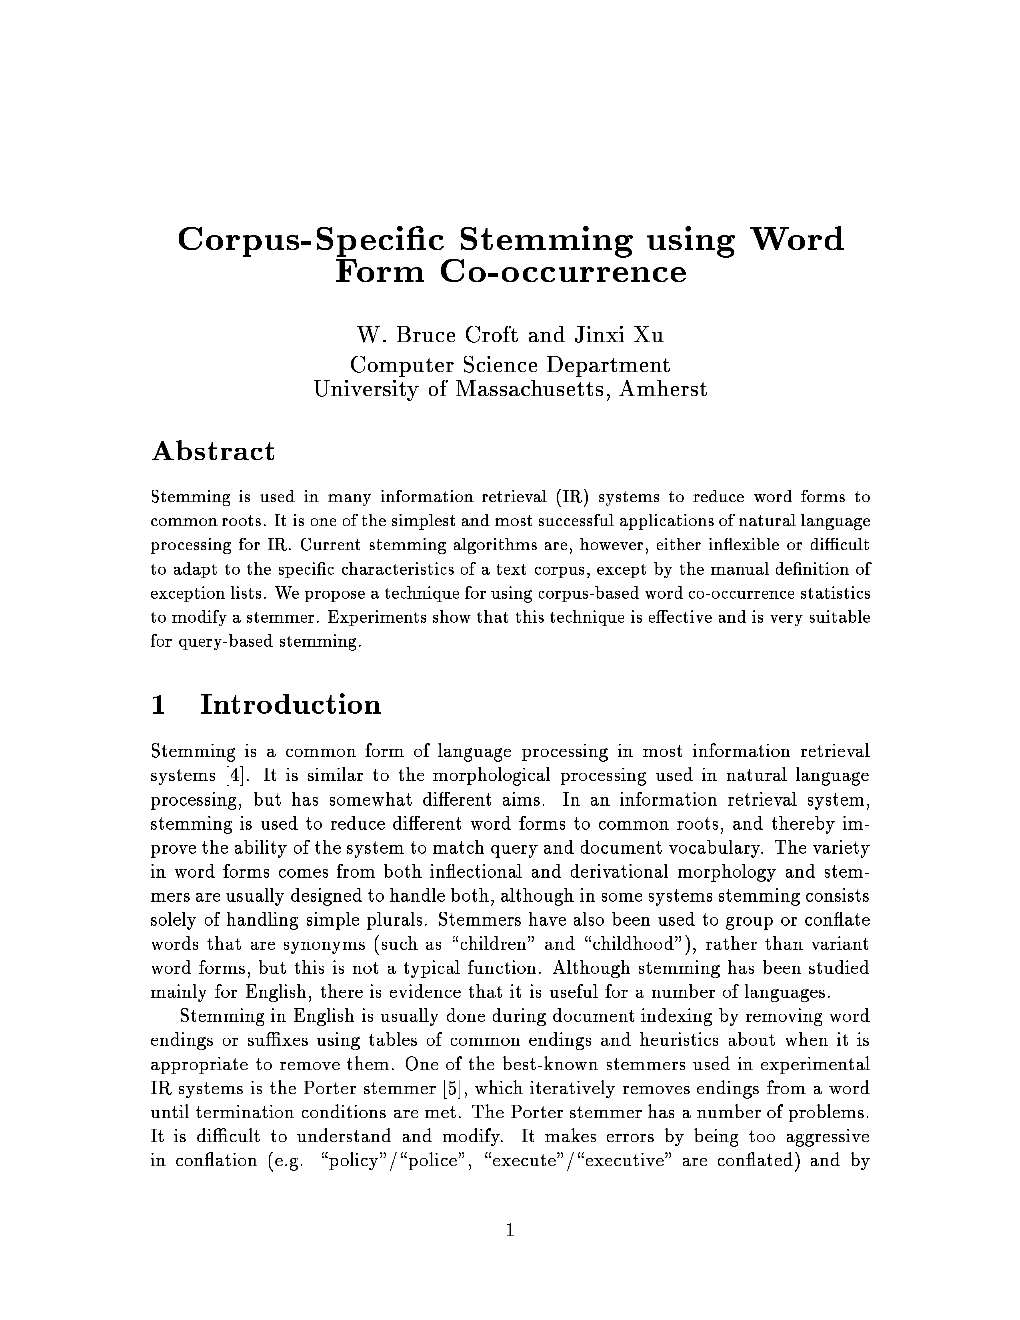 Corpus-Speci C Stemming Using Word Form Co-Occurrence